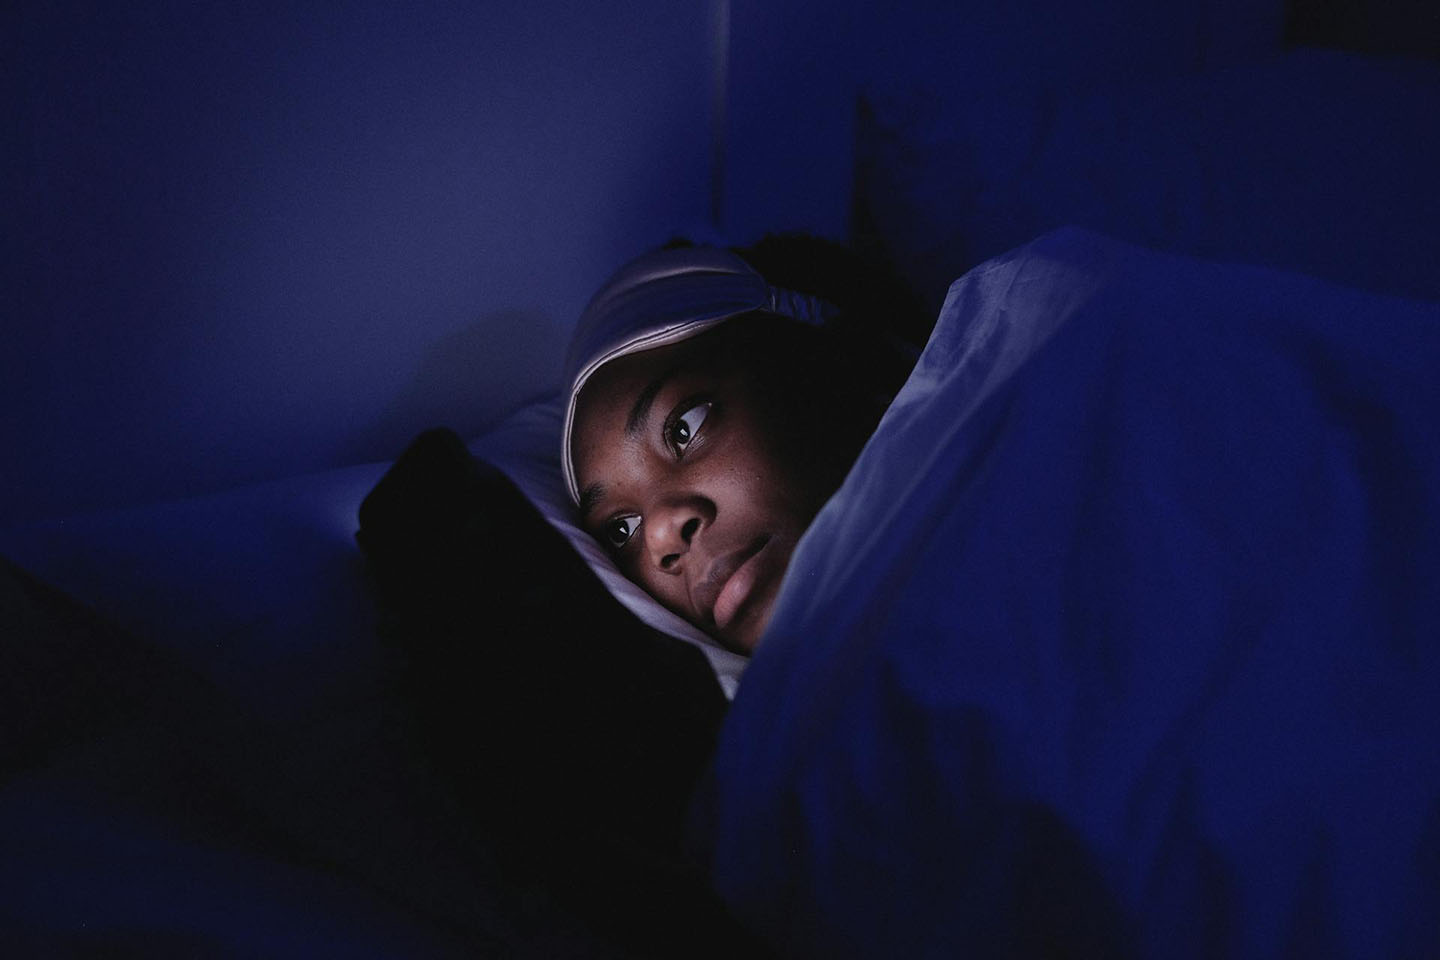 woman looking at a phone in bed at night